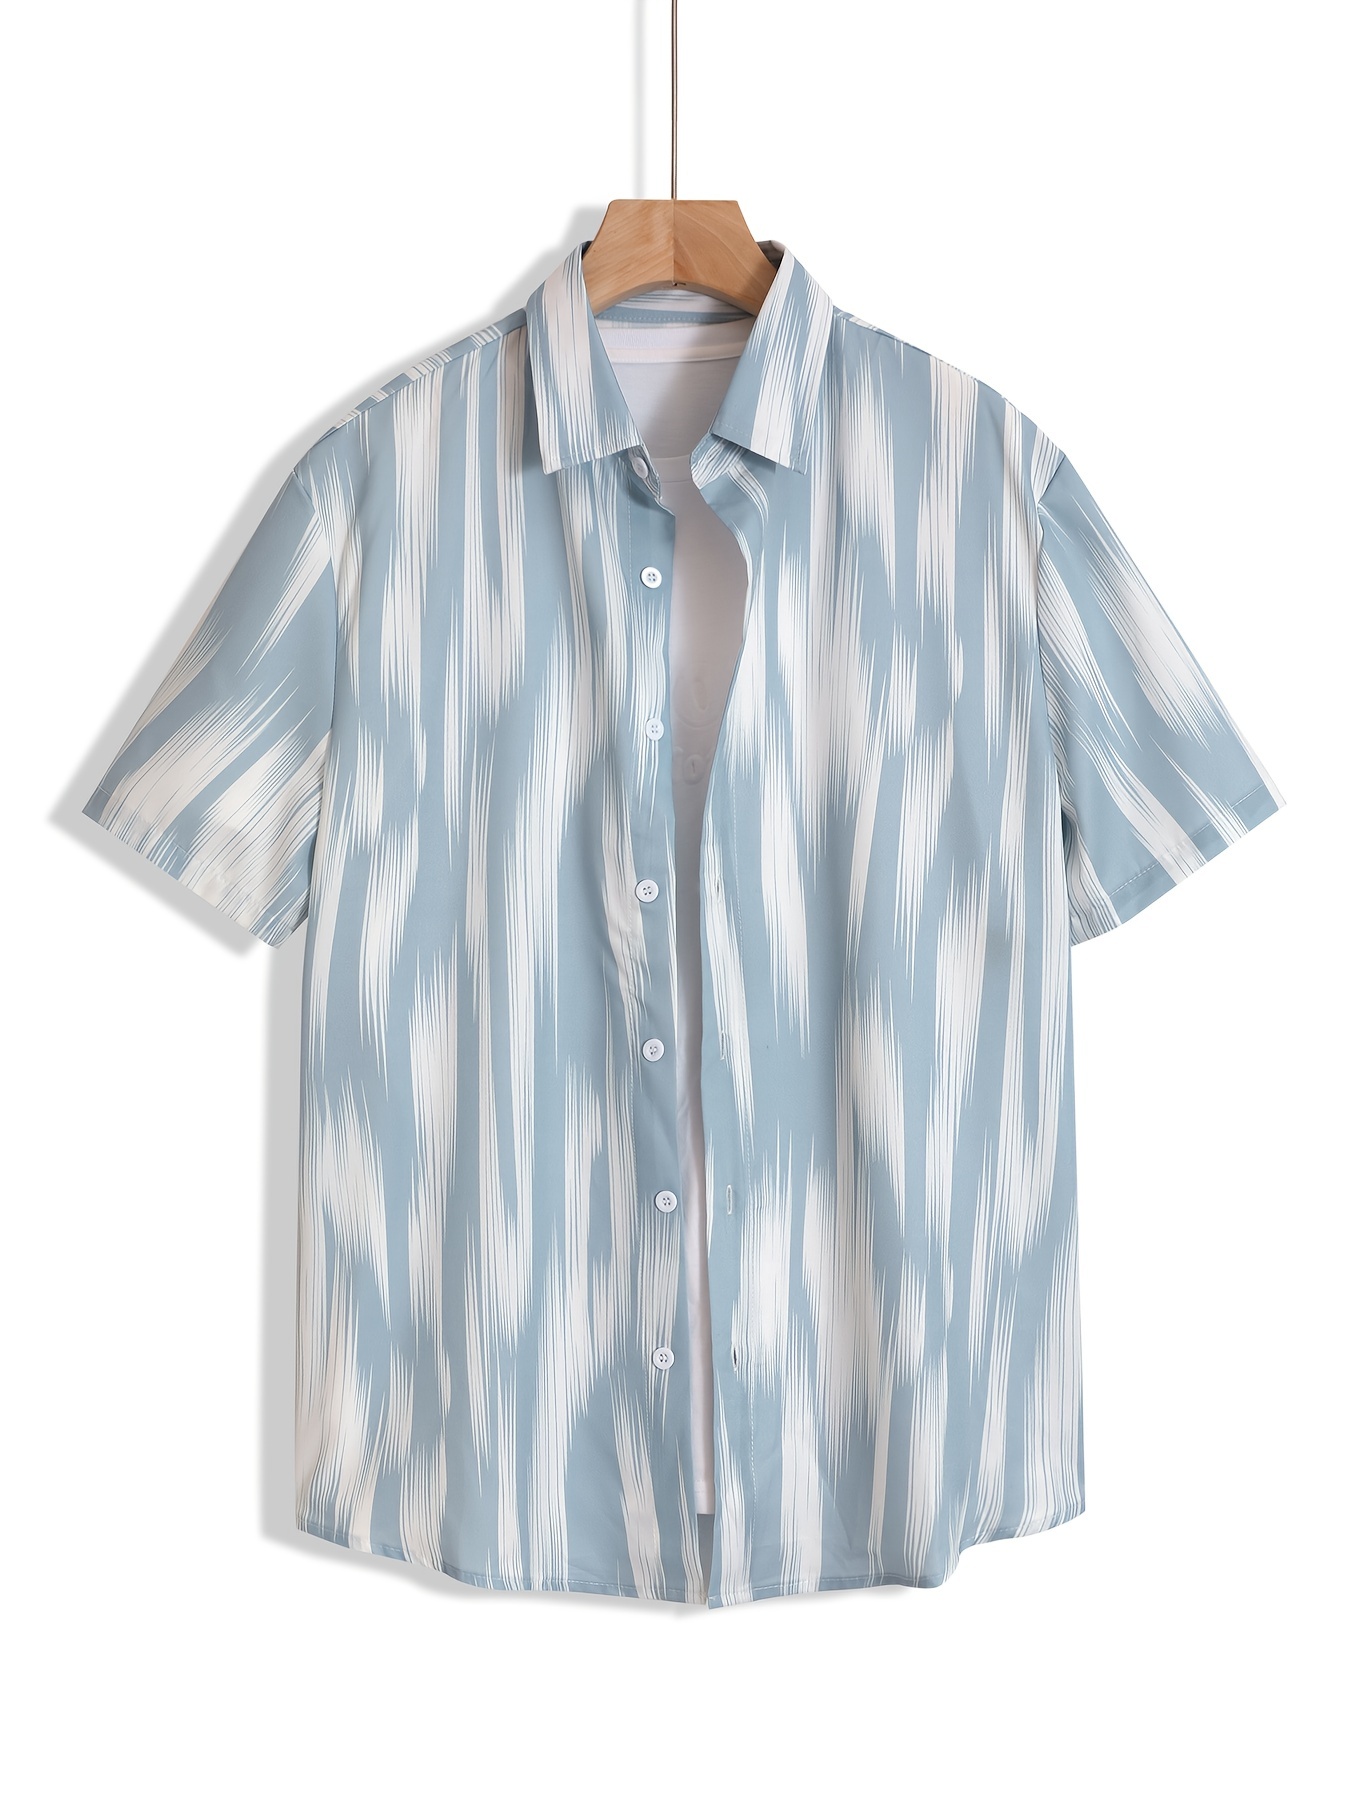 6 coolest resort shirts for men to cop this holiday season